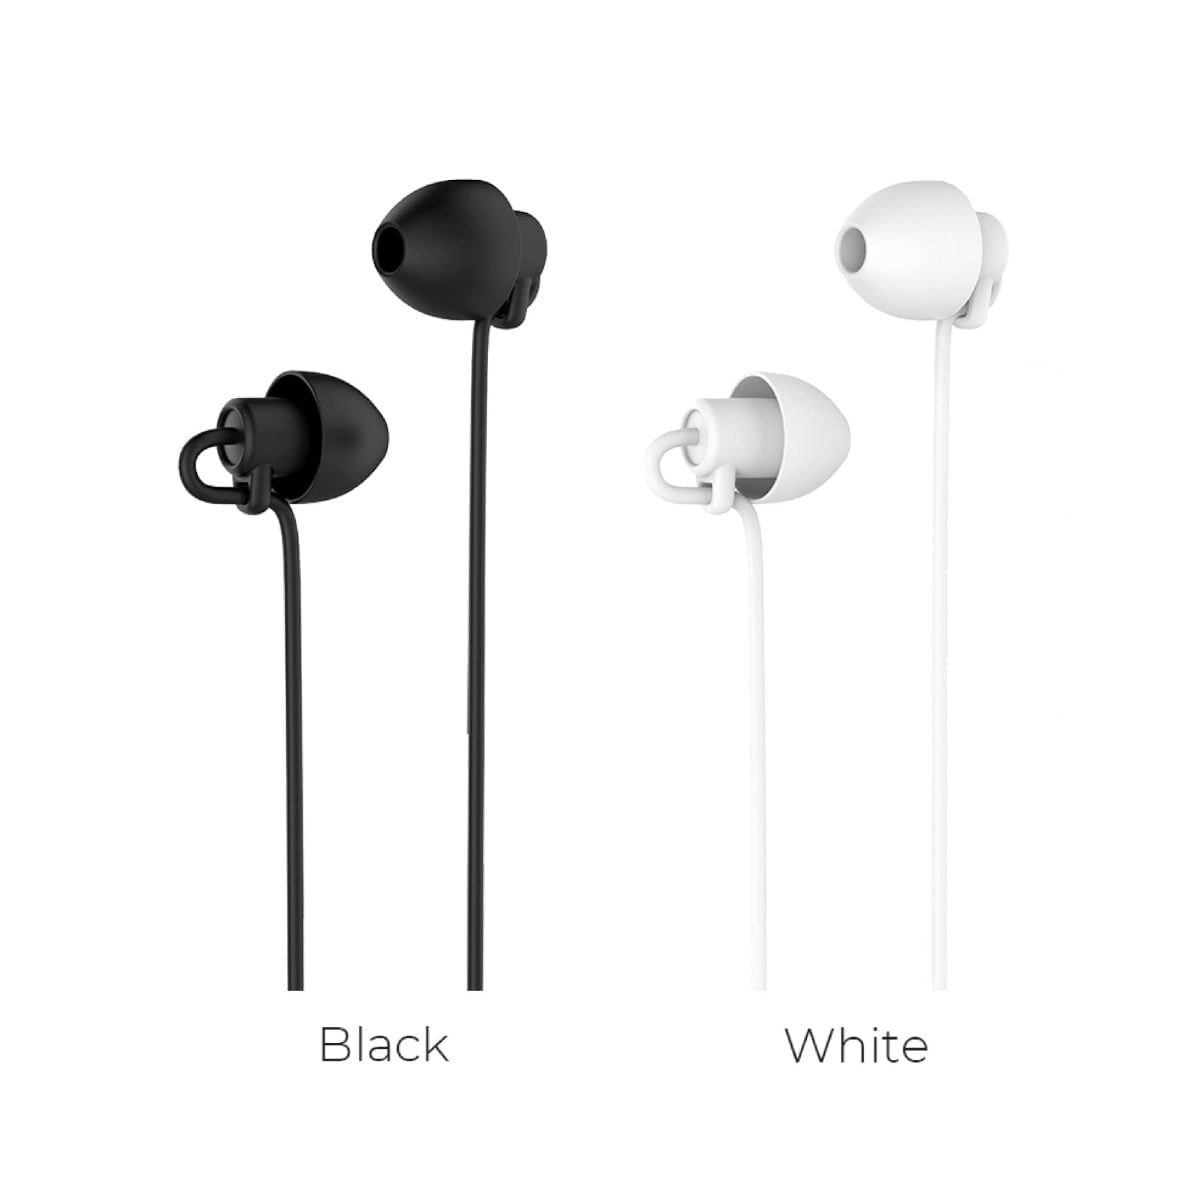 Earphone98 01 Scaled Hoco Material: Silica Gel, Tpe Enameled Wire Length: 1.2M, Weight: 10G Speaker: 6Mm Connector: 3.5Mm Microphone: With A Wheat Controller Wire Control: Single Button Control Silicone Material, Soft And Does Not Oppress The Ear, Suitable For Sleeping Silicon Sleep Earphones M56 Earphone Wired Headphones With Mic - Black Silicon Sleep Earphones M56 Earphone Wired Headphones With Mic - Black